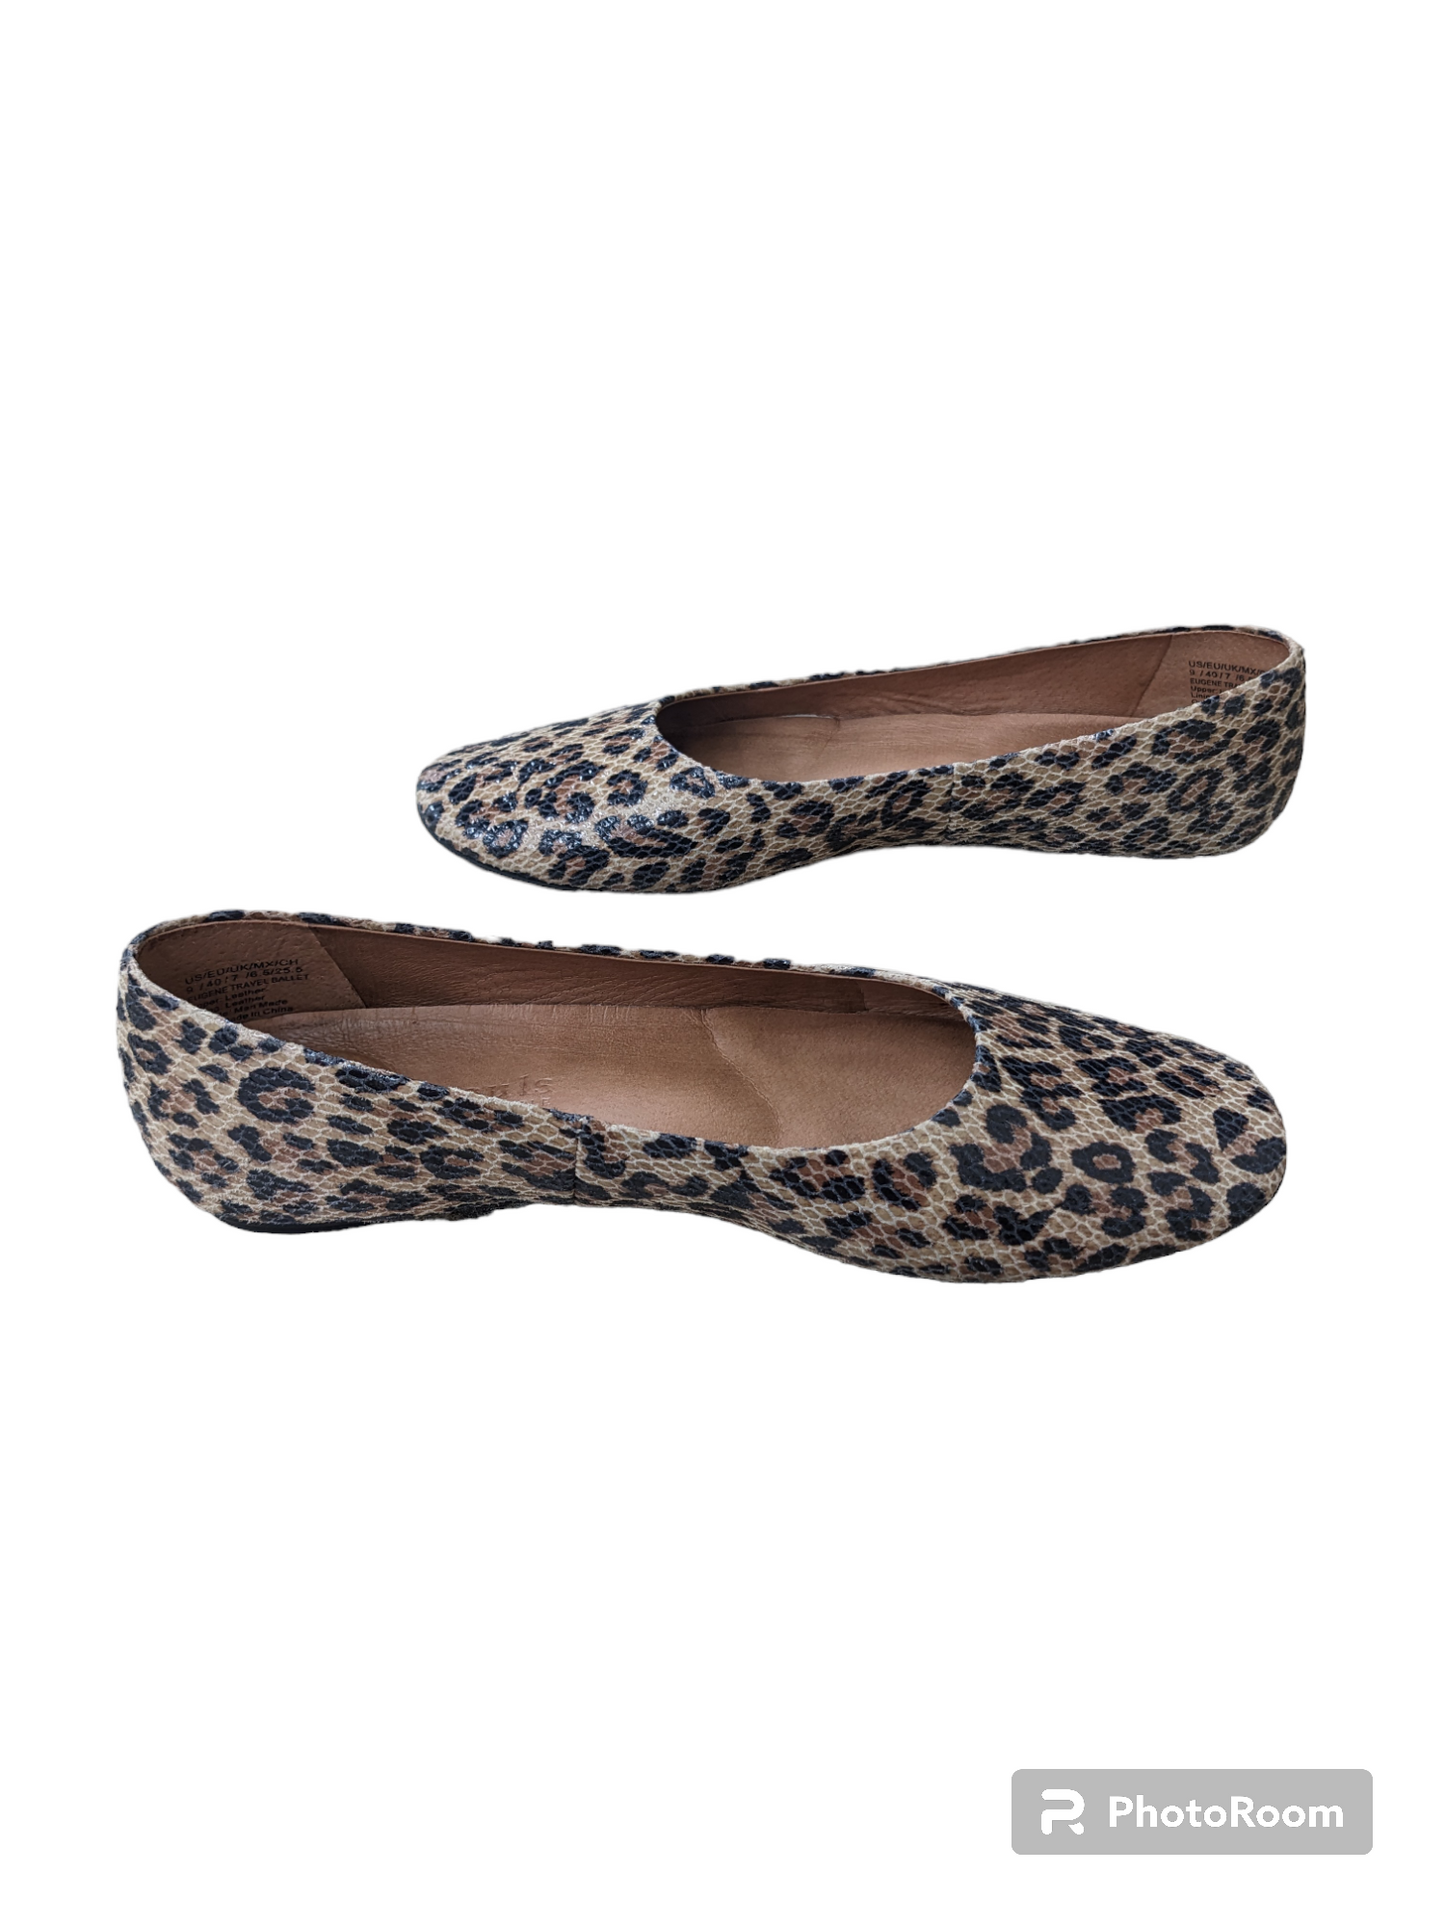 Shoes Flats Ballet By Gentle Souls  Size: 9